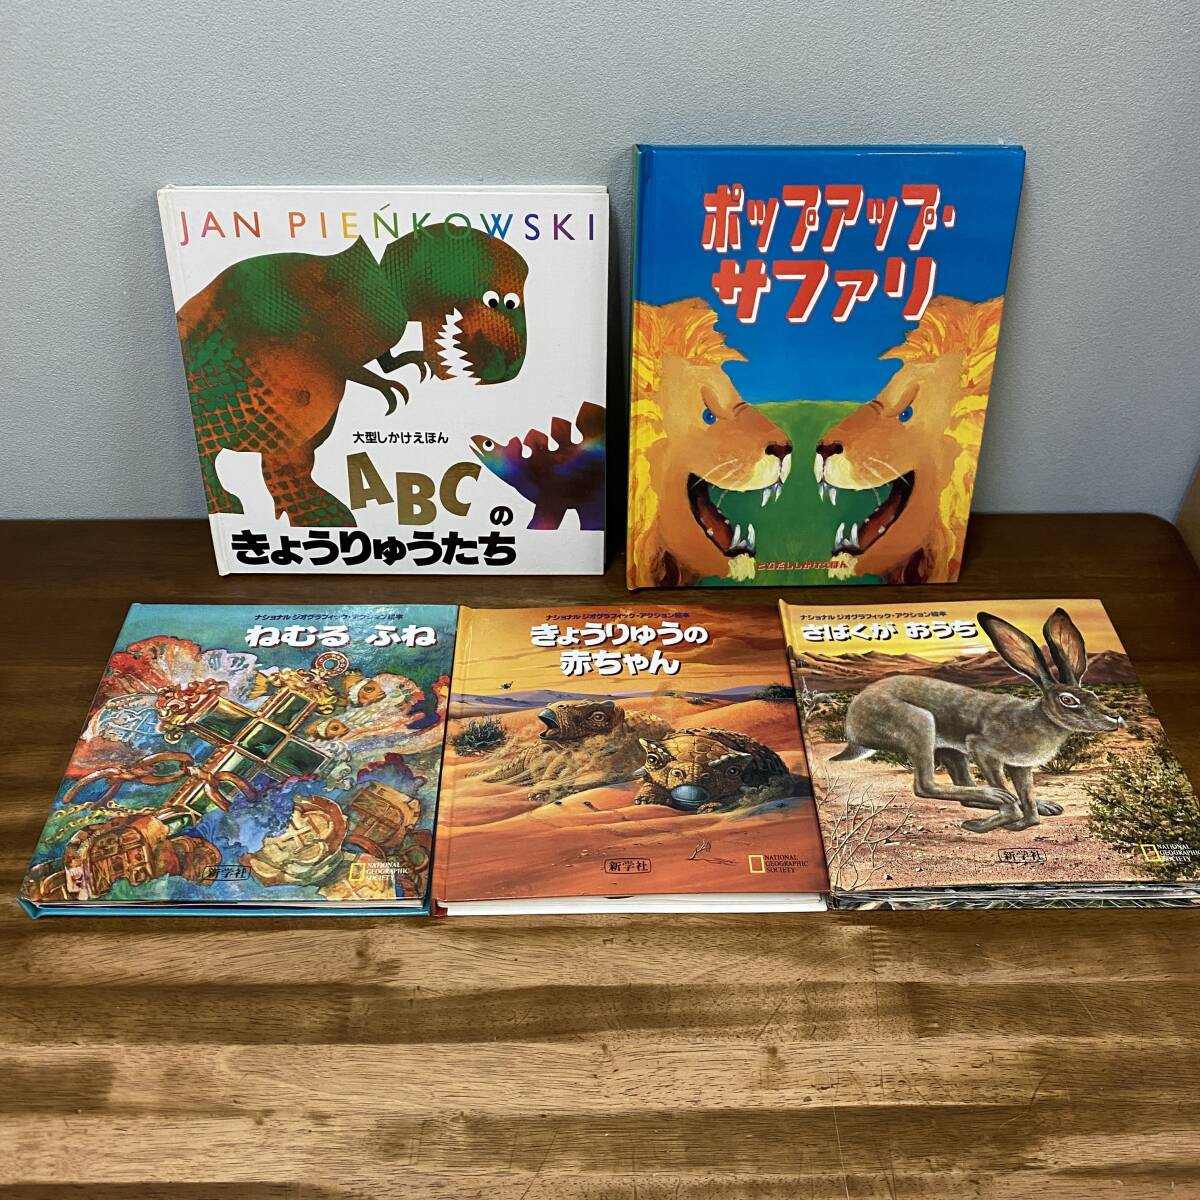  device picture book only large amount total 19 pcs. study beginning picture book stone chip puts out picture book together beautiful goods child care . kindergarten masterpiece popular set dinosaur picture book 3